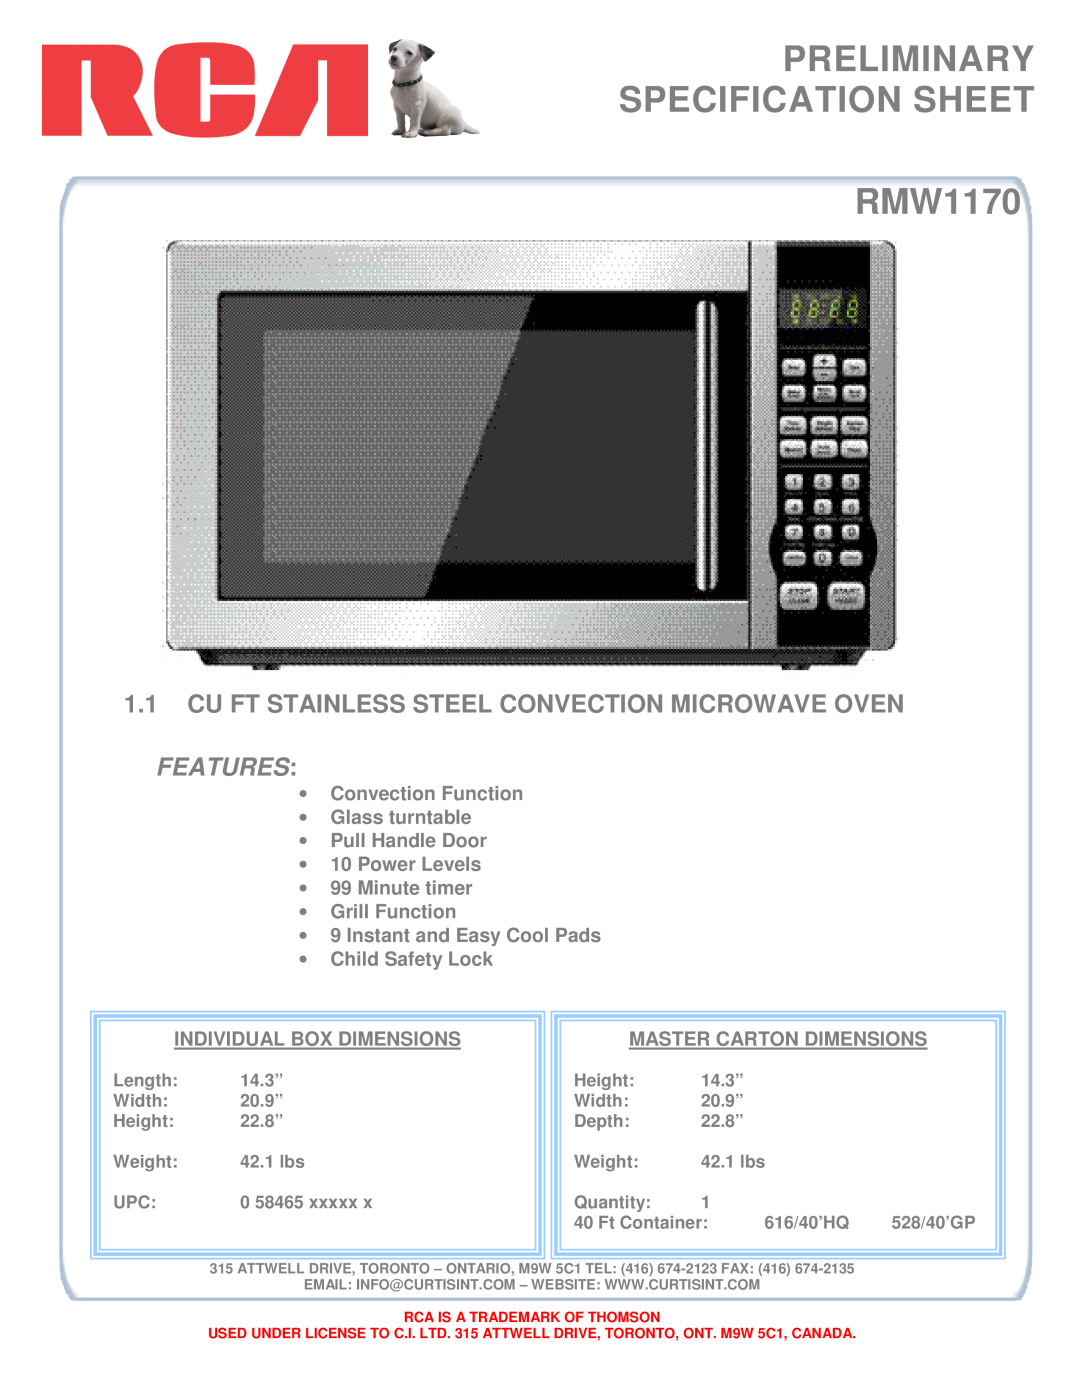 RCA specifications PRELIMINARY SPECIFICATION SHEET RMW1170, Features, Convection Function Glass turntable 